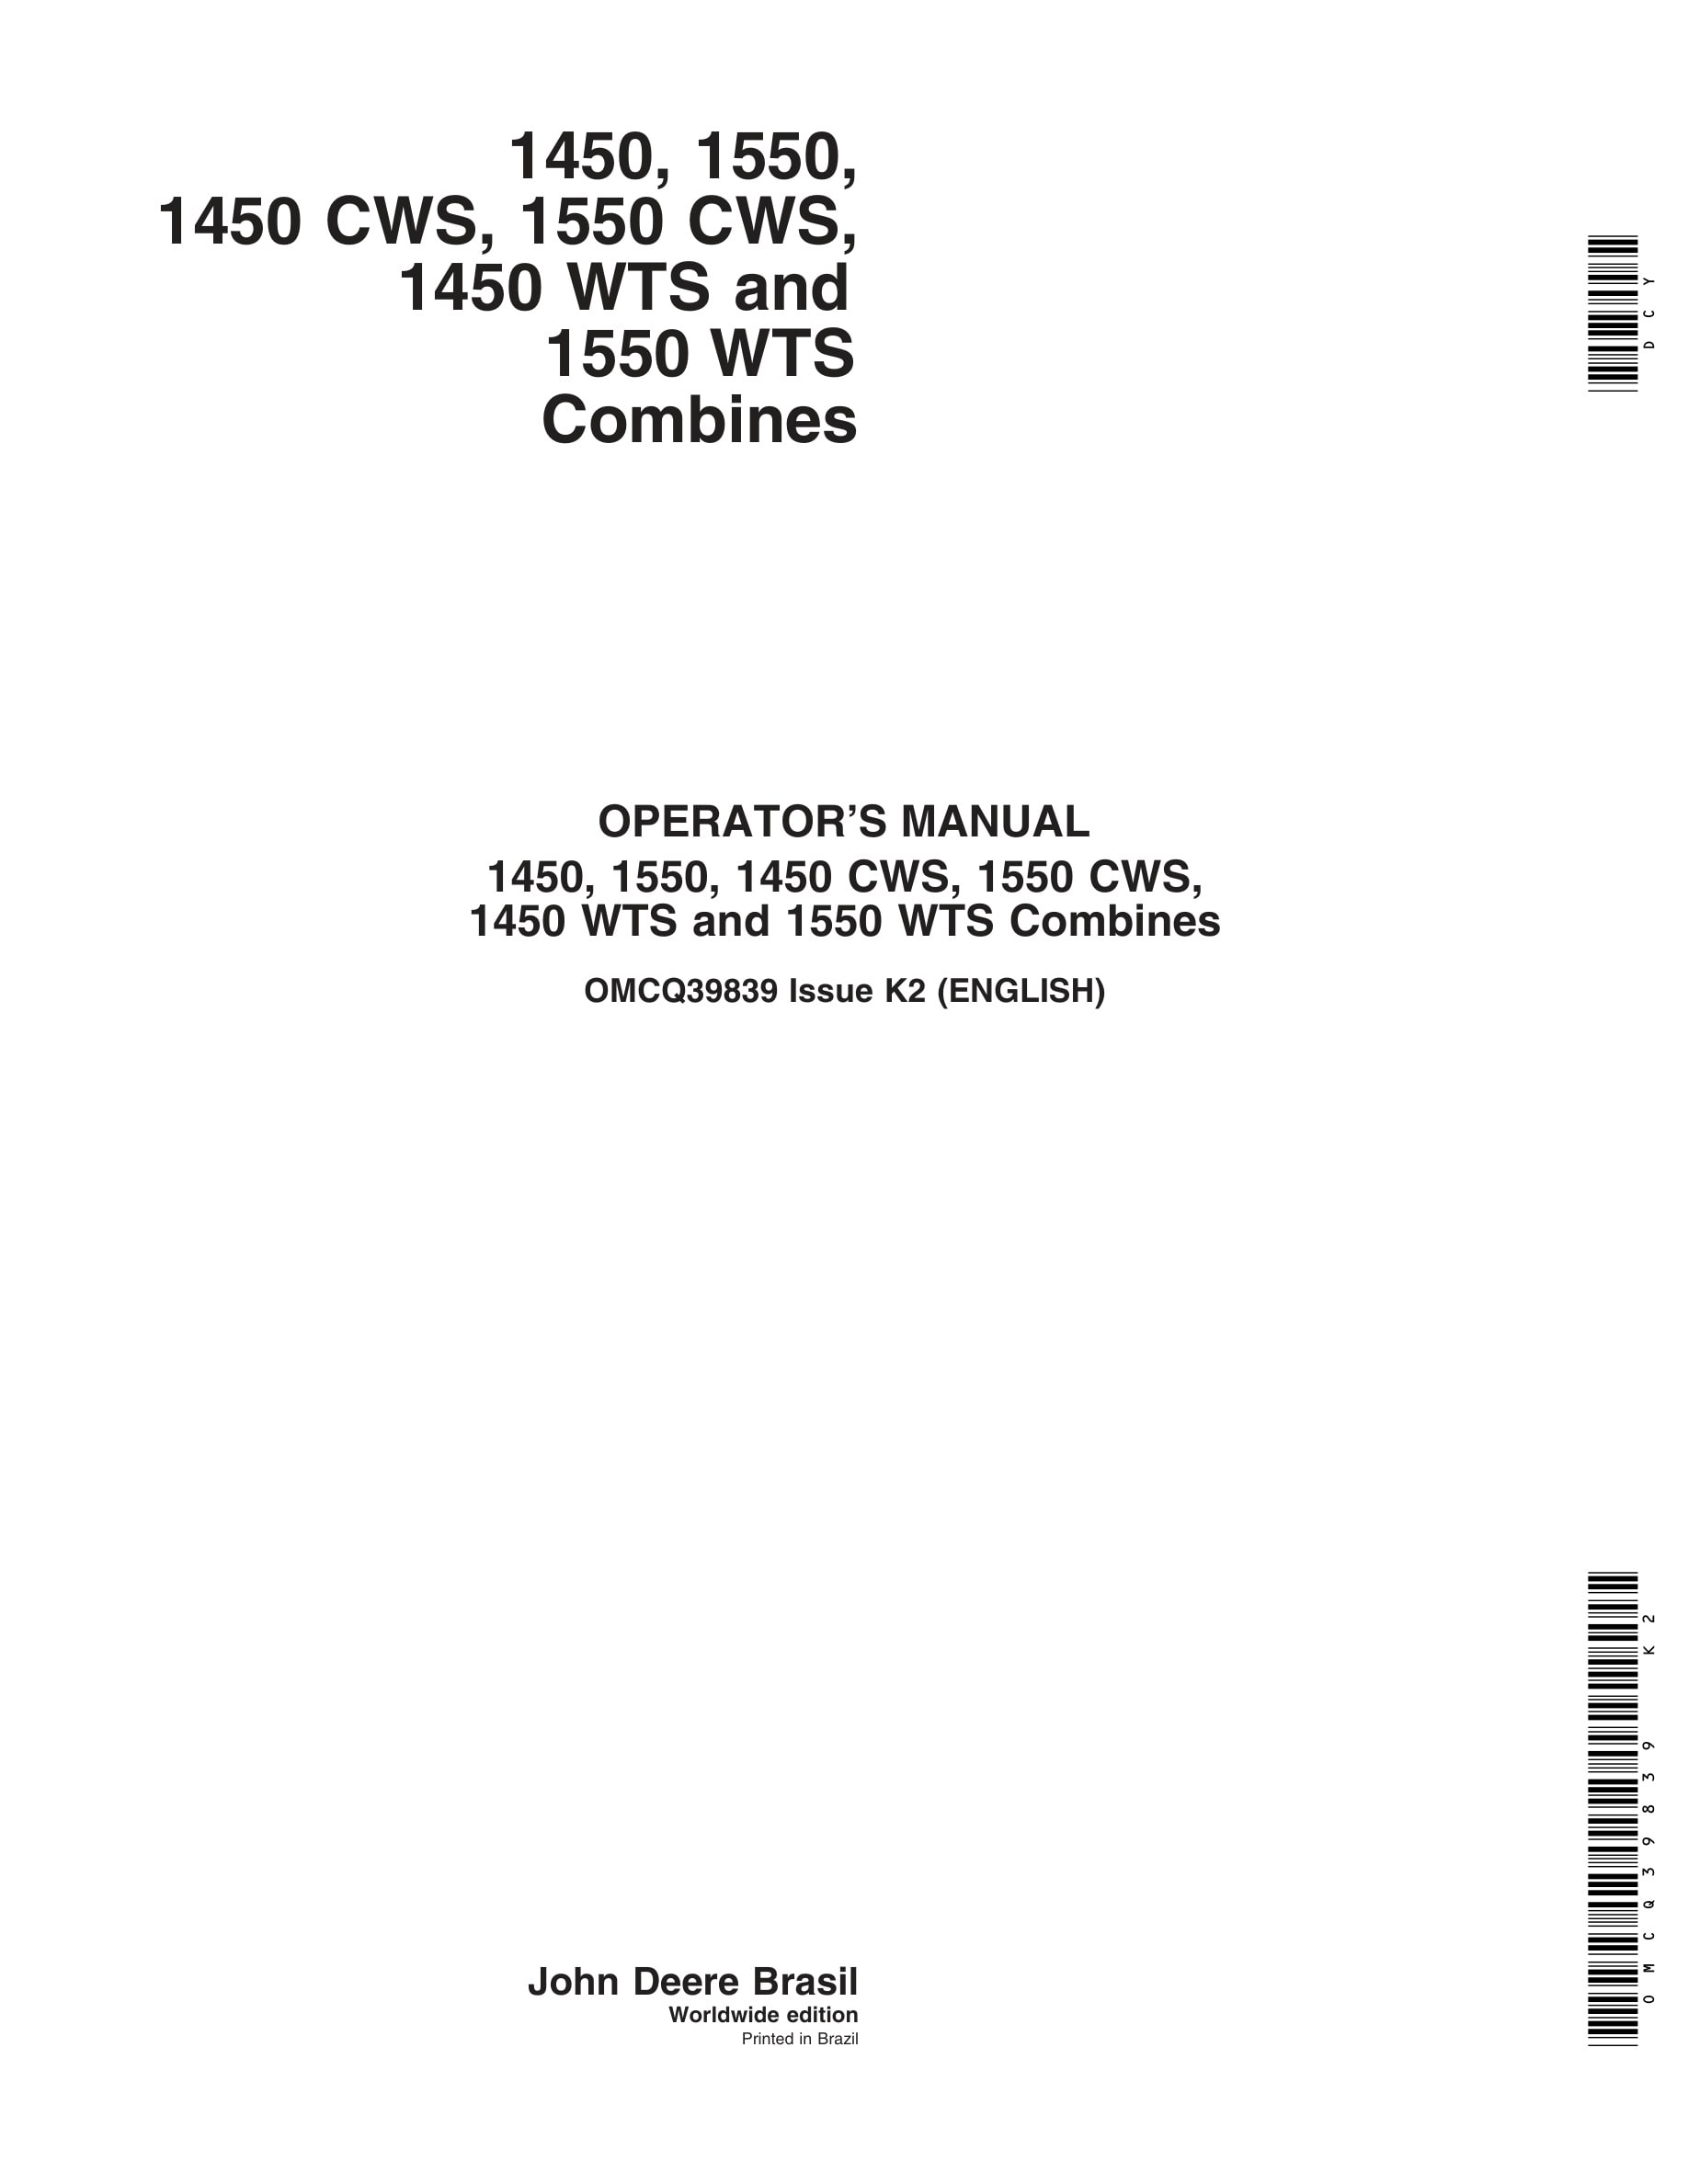 John Deere 1450, 1550, 1450 CWS, 1550 CWS, 1450 WTS and 1550 WTS Combine Operator Manual OMCQ39839-1